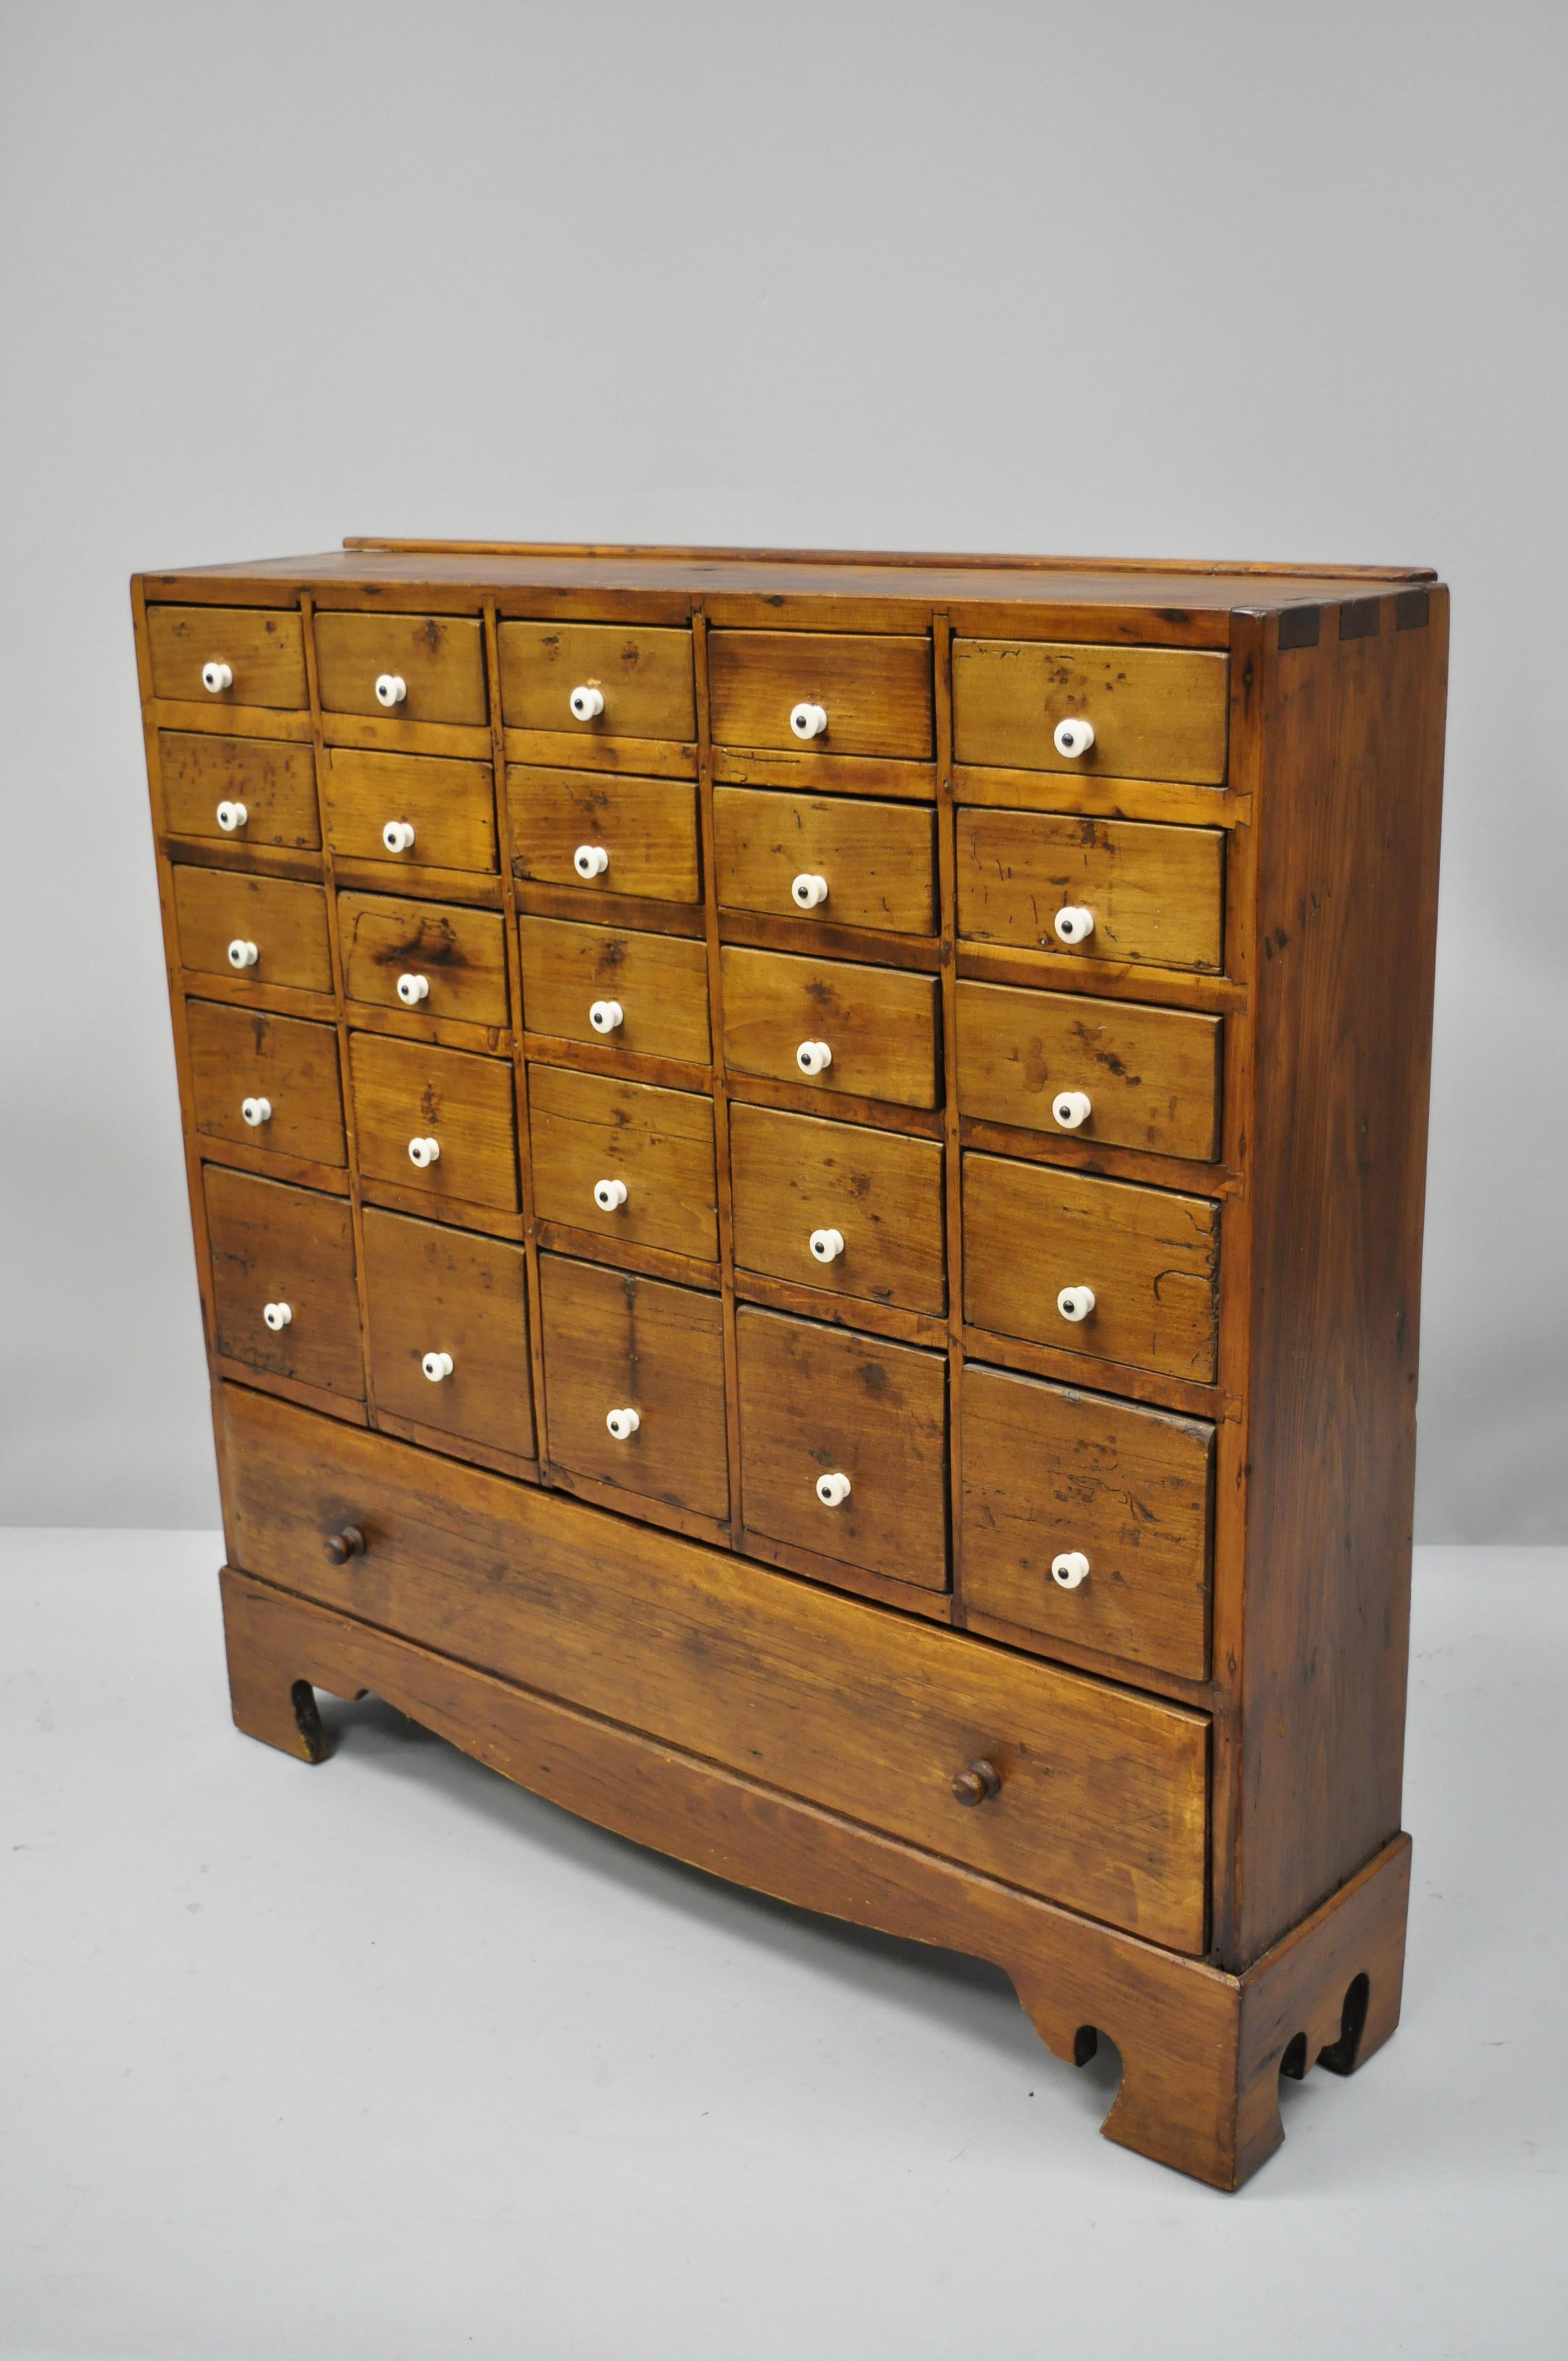 19th century American 26 drawer dovetailed pine wood apothecary cabinet chest. Item includes dovetailed joinery, remarkable antique patina, solid wood construction, 26 dovetail drawers, very nice antique, quality American item, circa early 19th